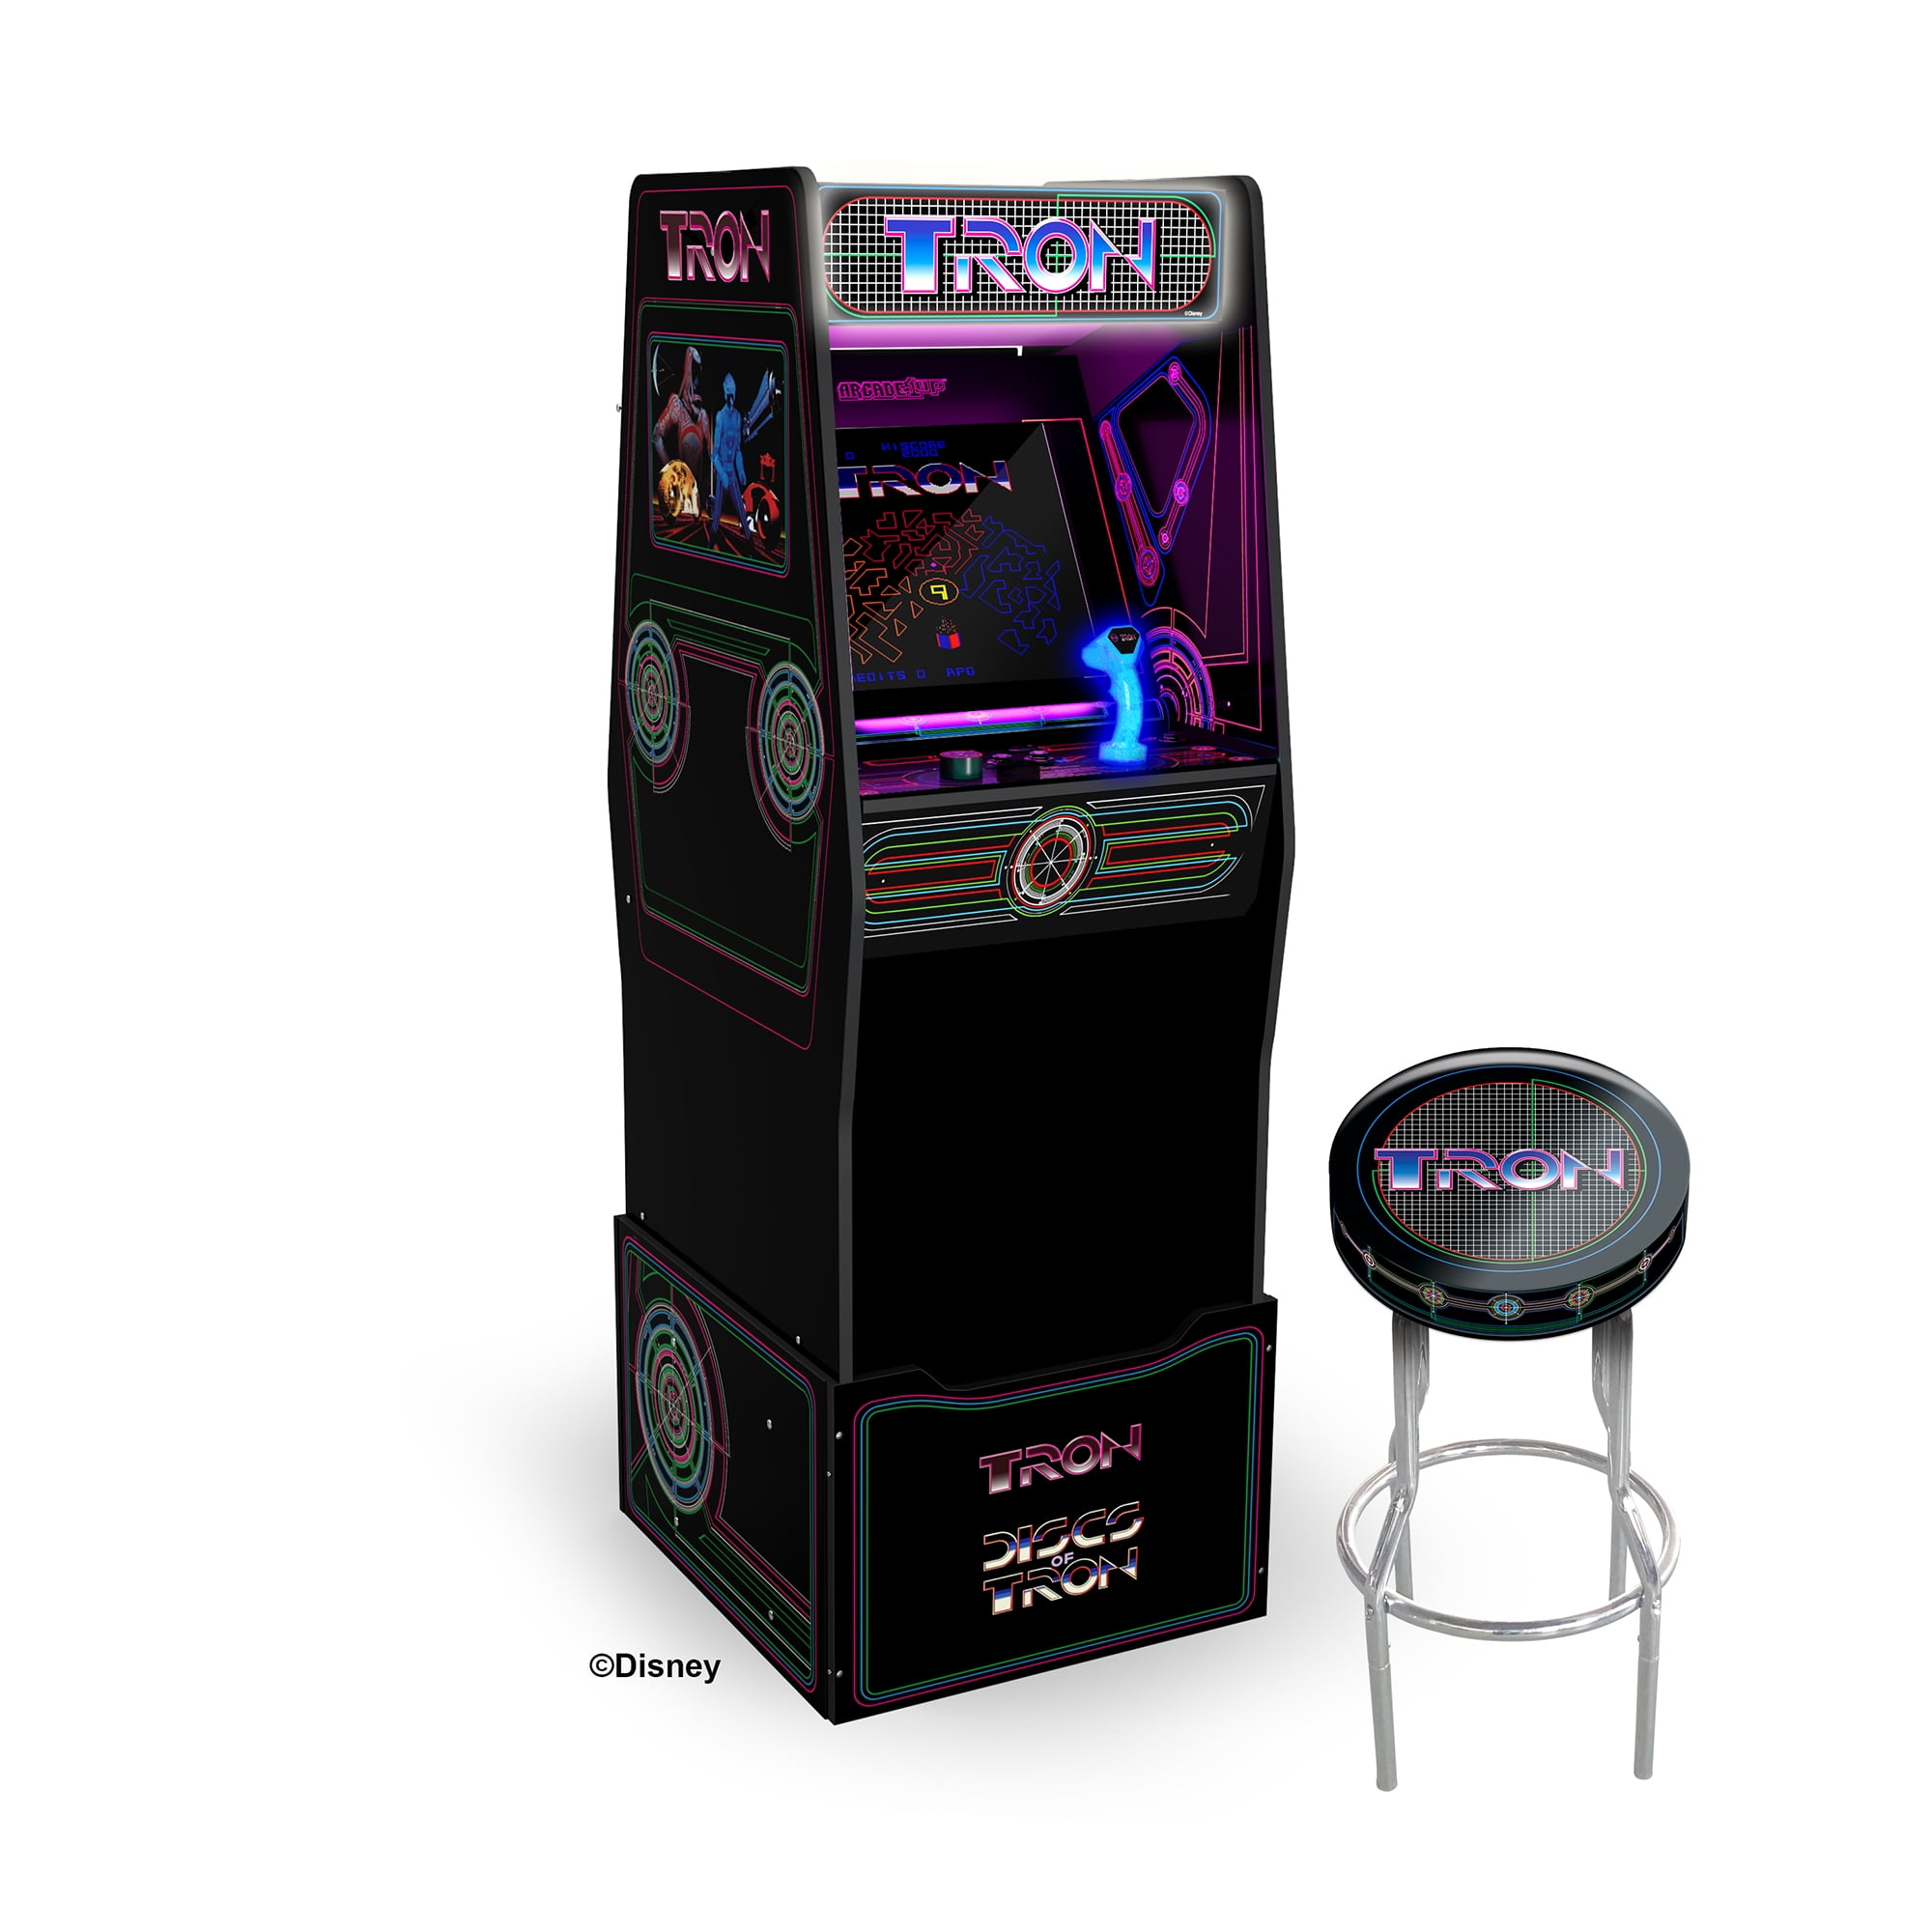 arcade video game header Details about   Tron Marquee FRIDGE MAGNET 1.5 x 4.5 inches 